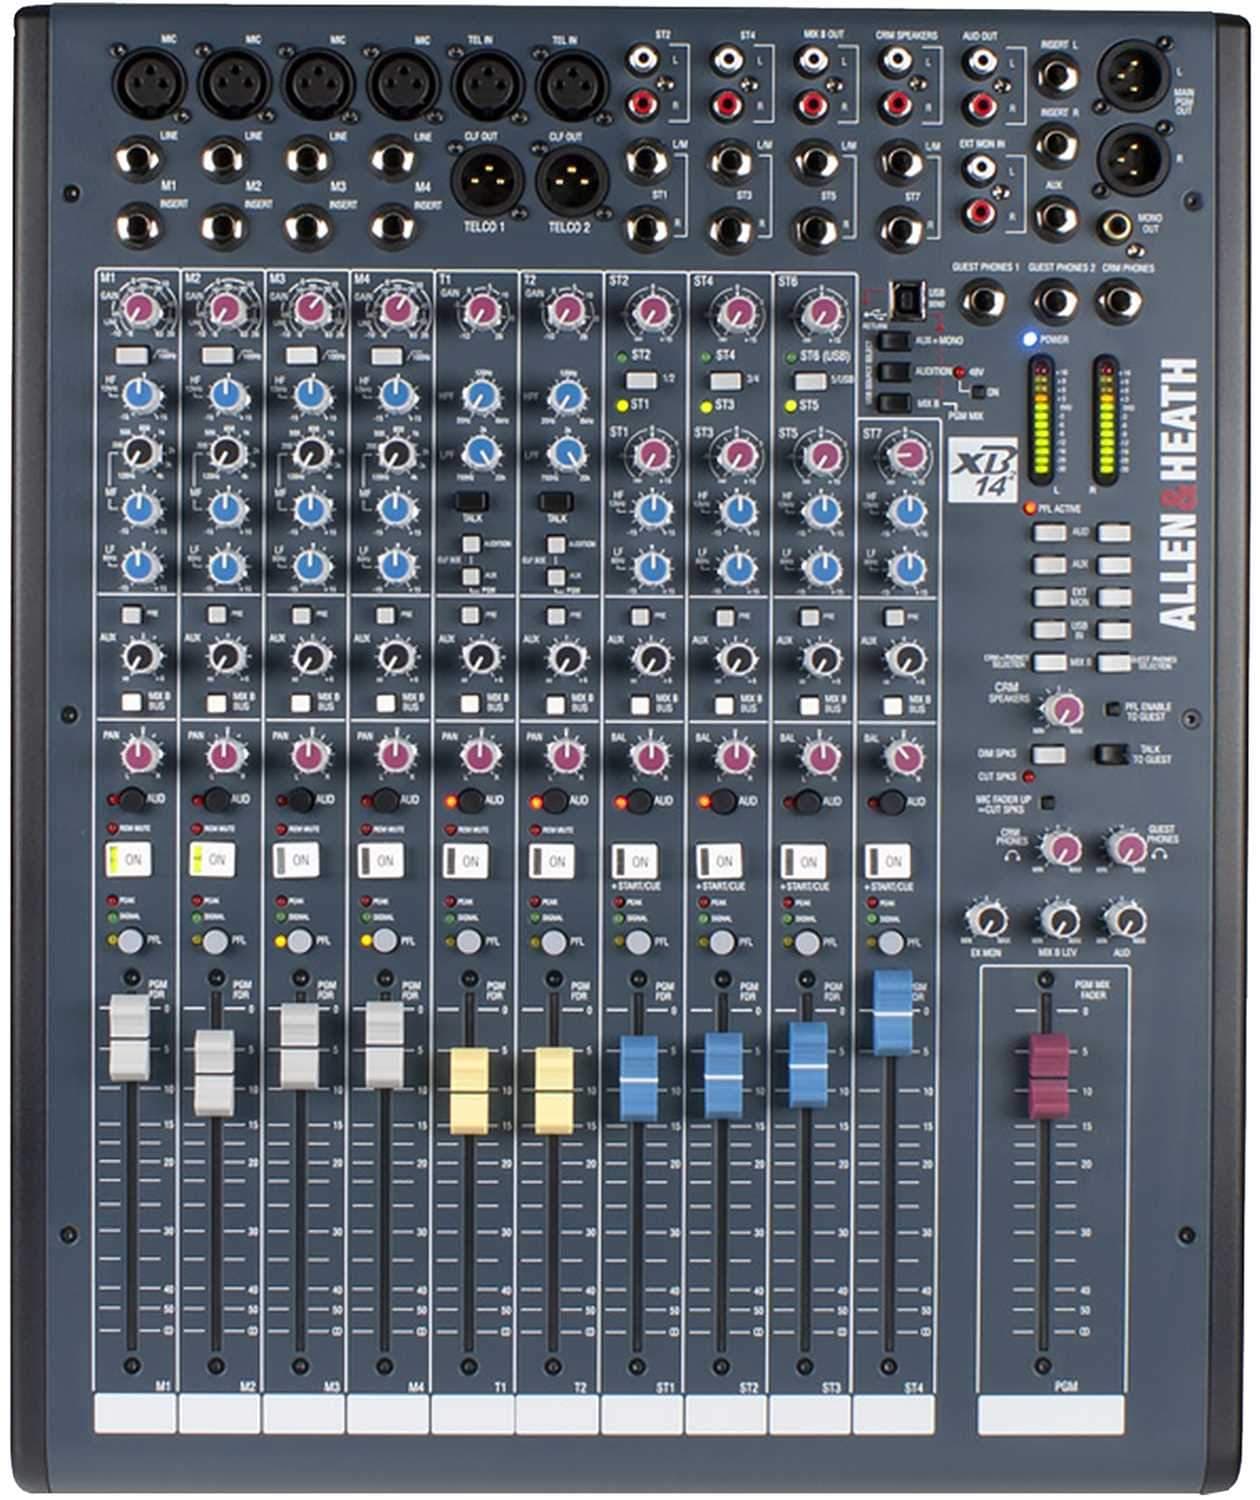 Allen & Heath XB2-14 Compact Broadcast Mixer - PSSL ProSound and Stage Lighting